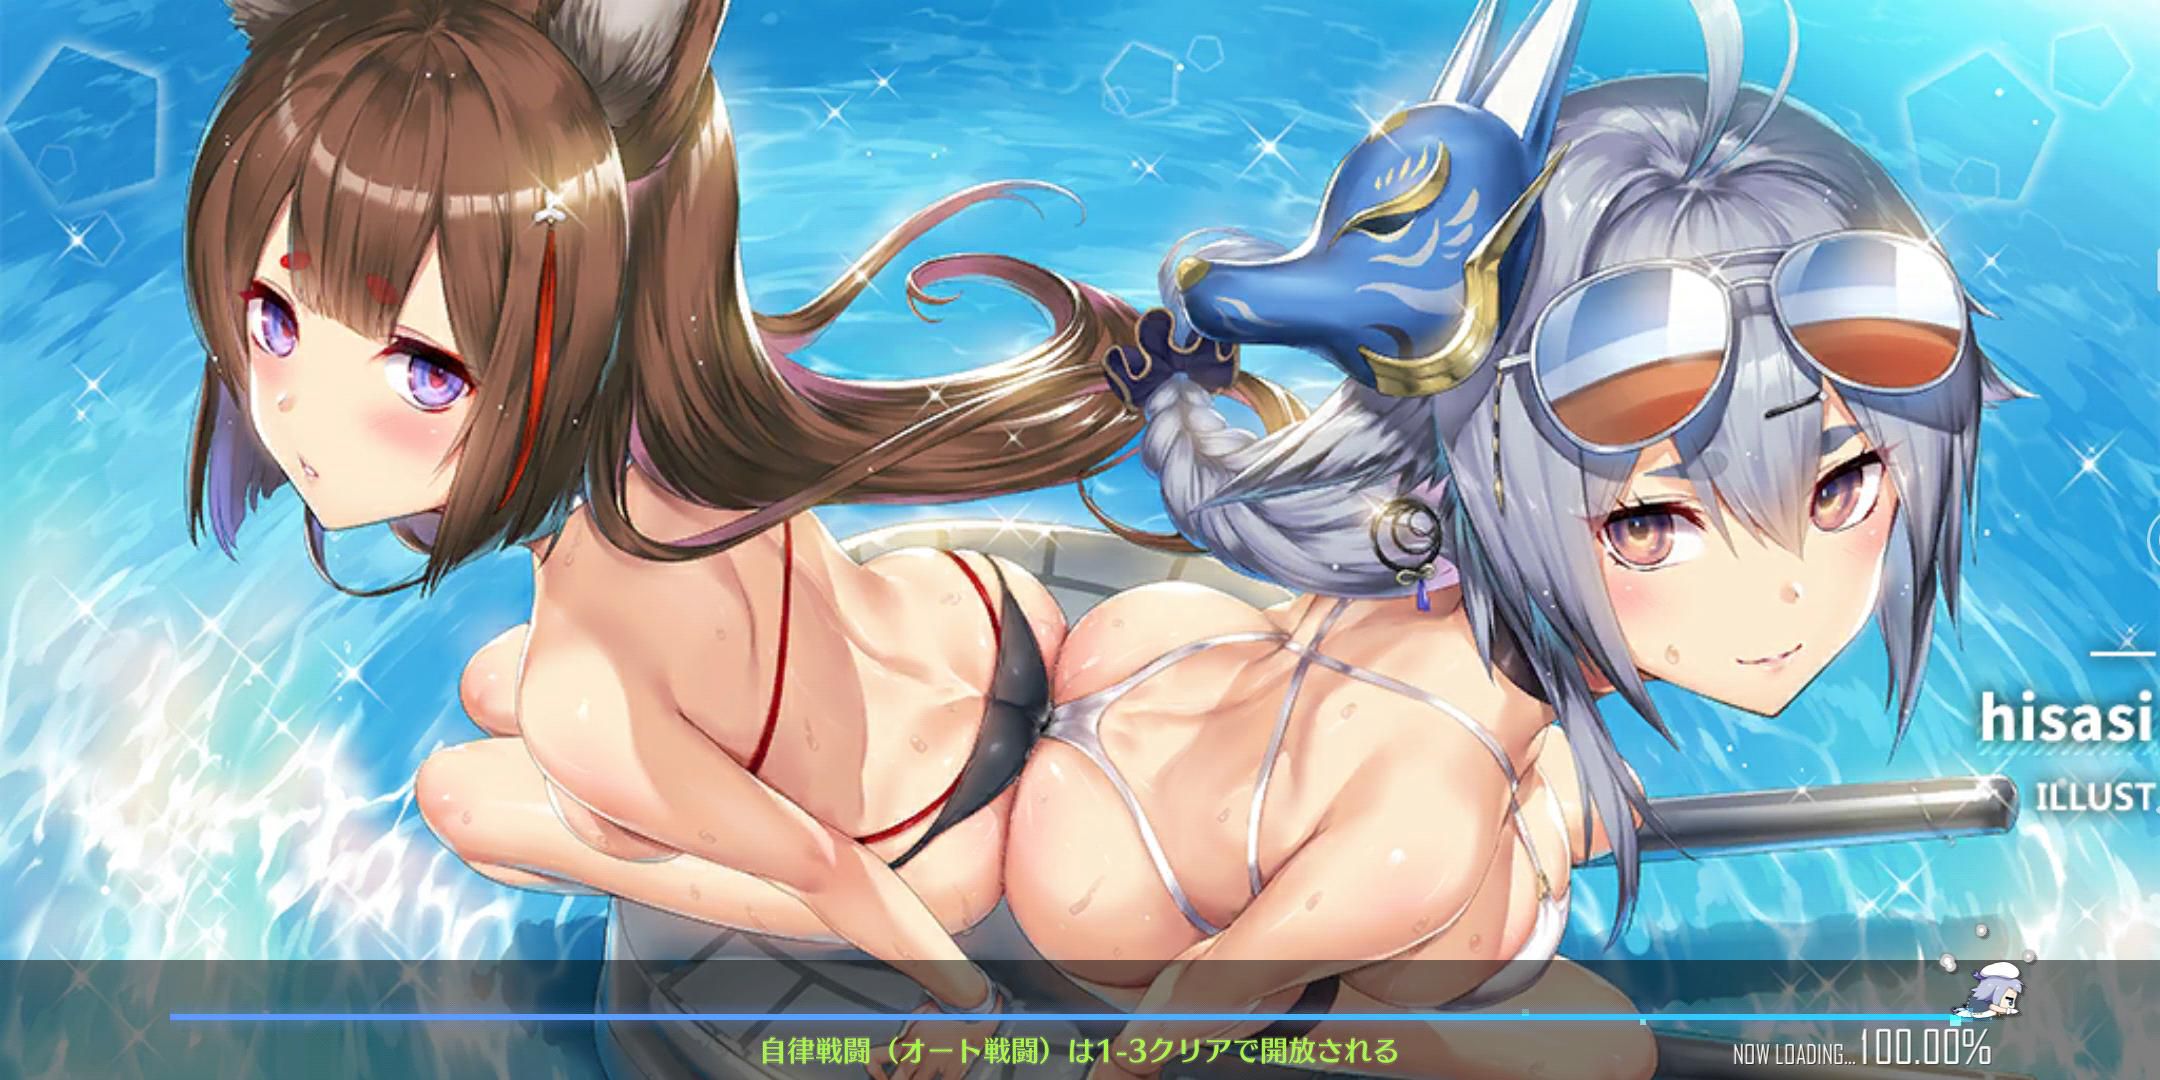 [Image] illustrations that erotic to the highest grade Azulen character www www 6